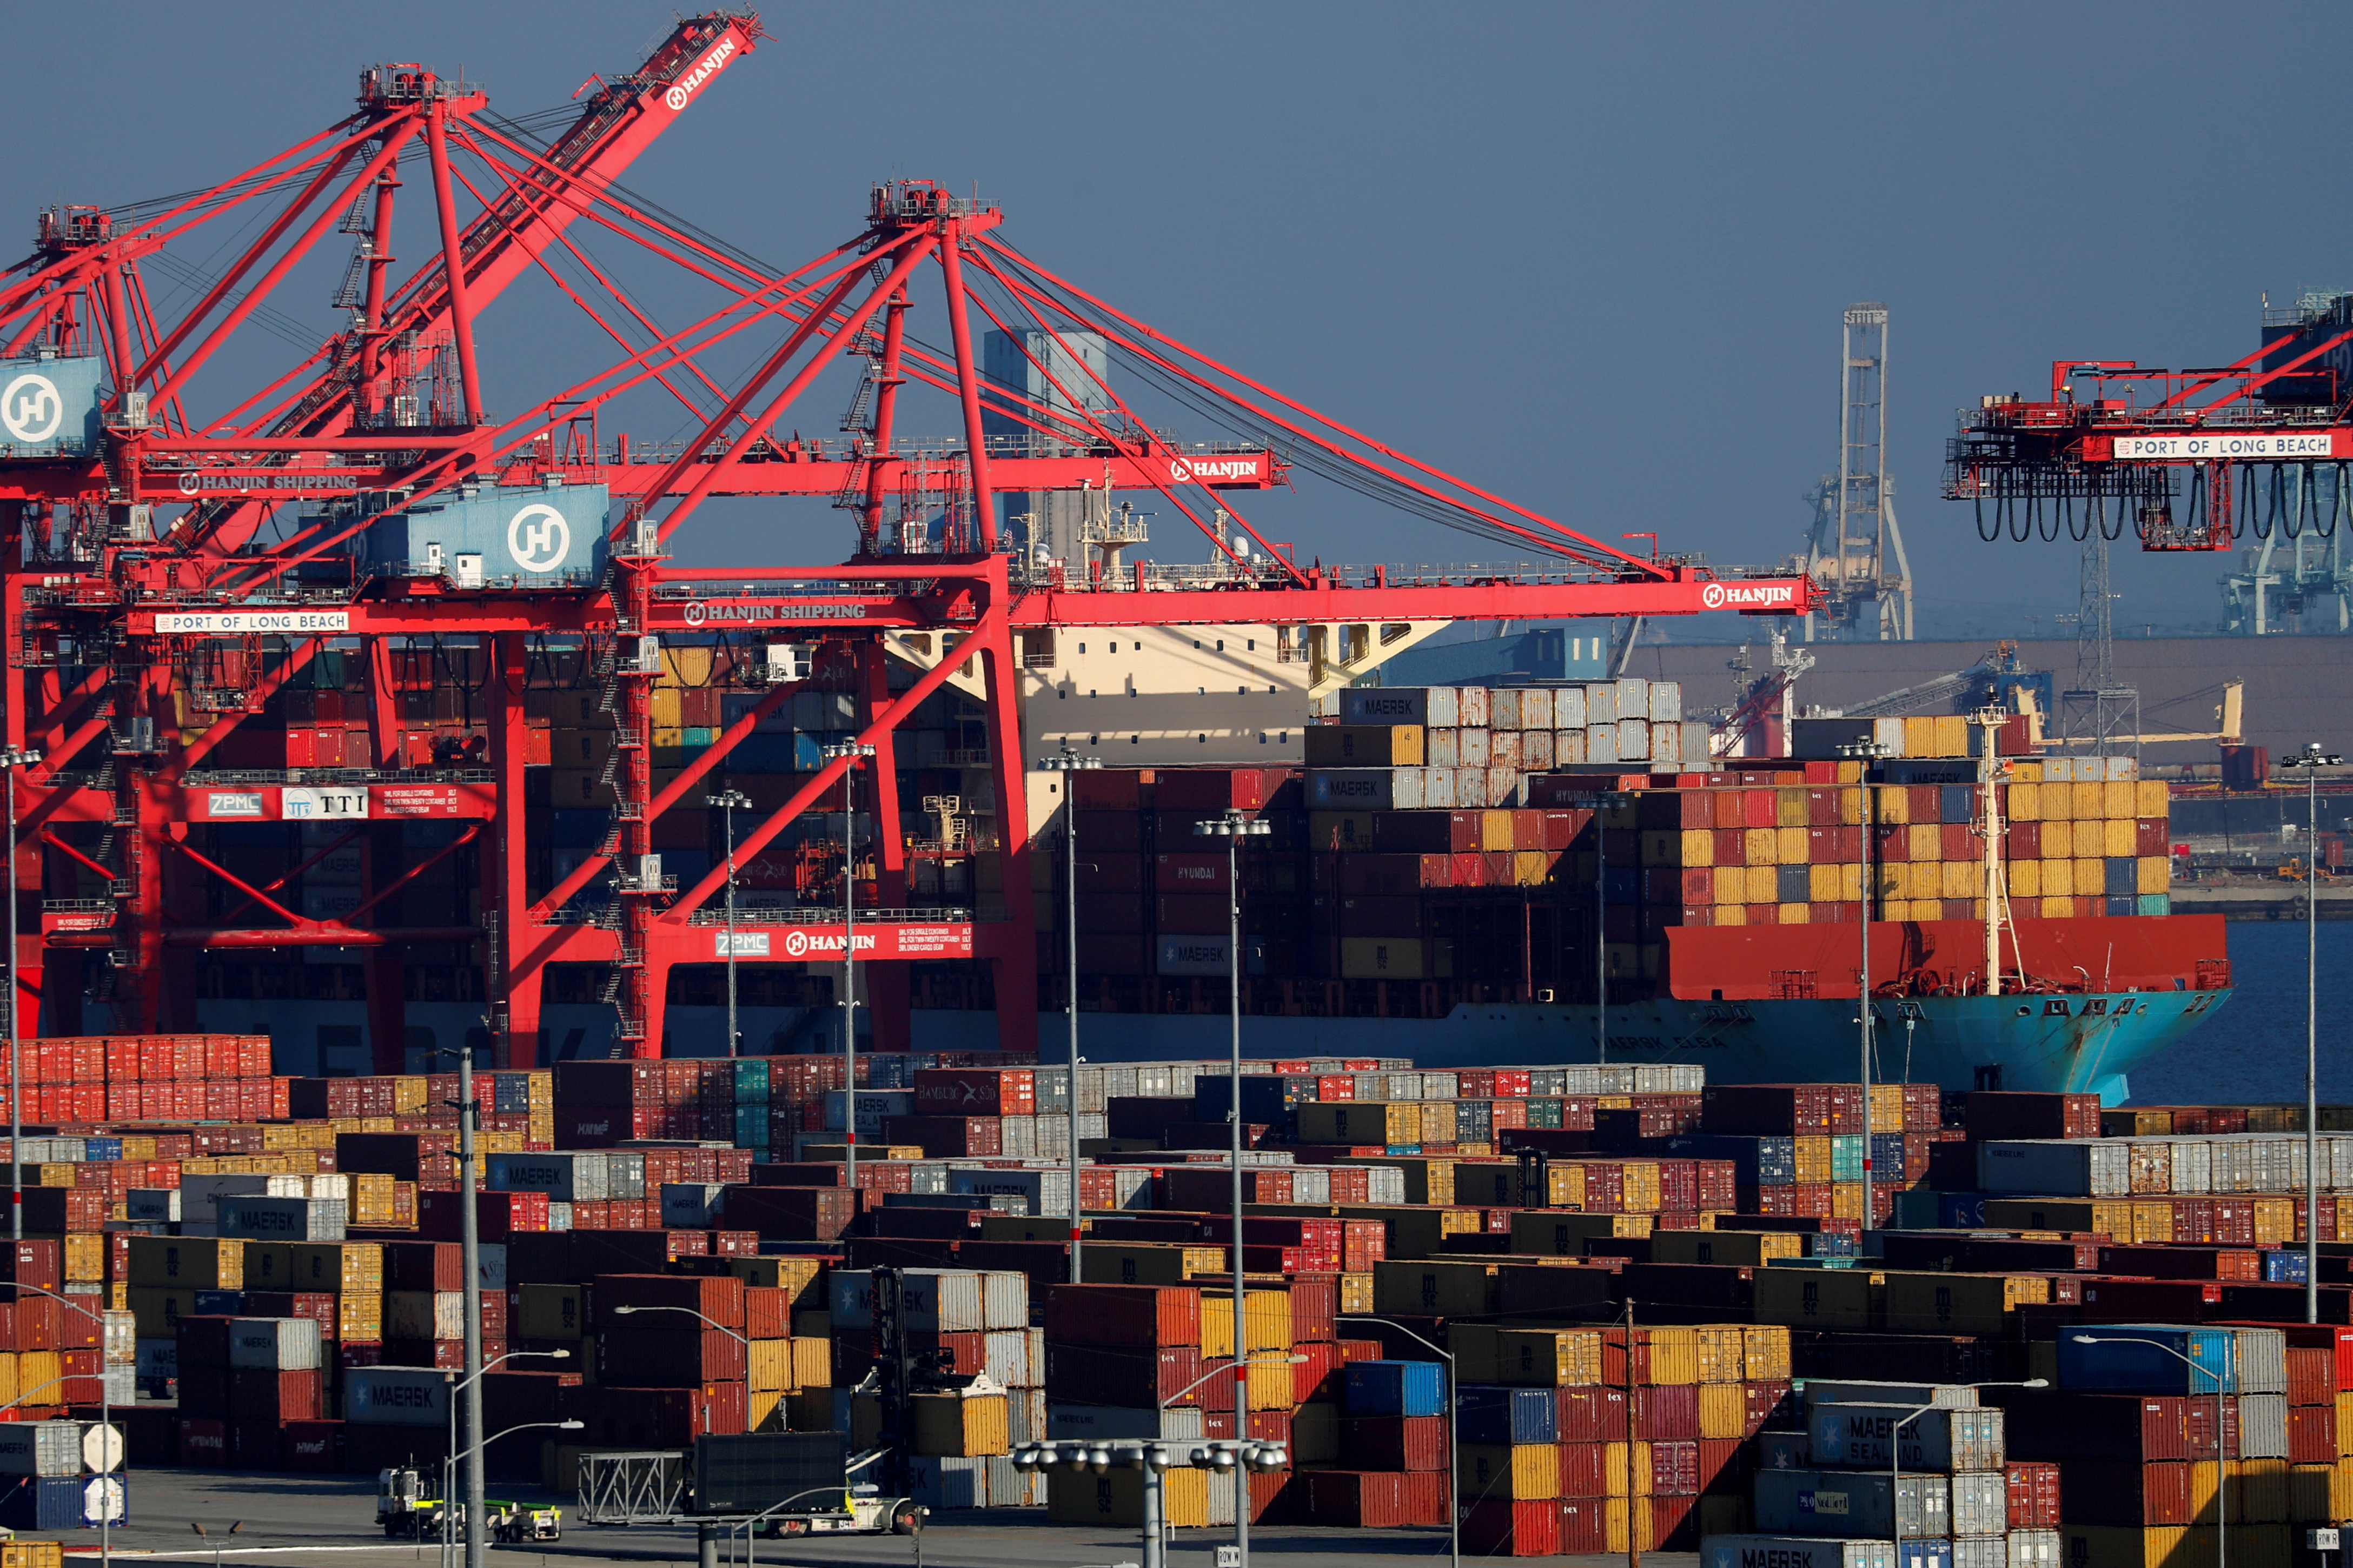 Ships and shipping containers are pictured at the port of Long Beach in Long Beach, California